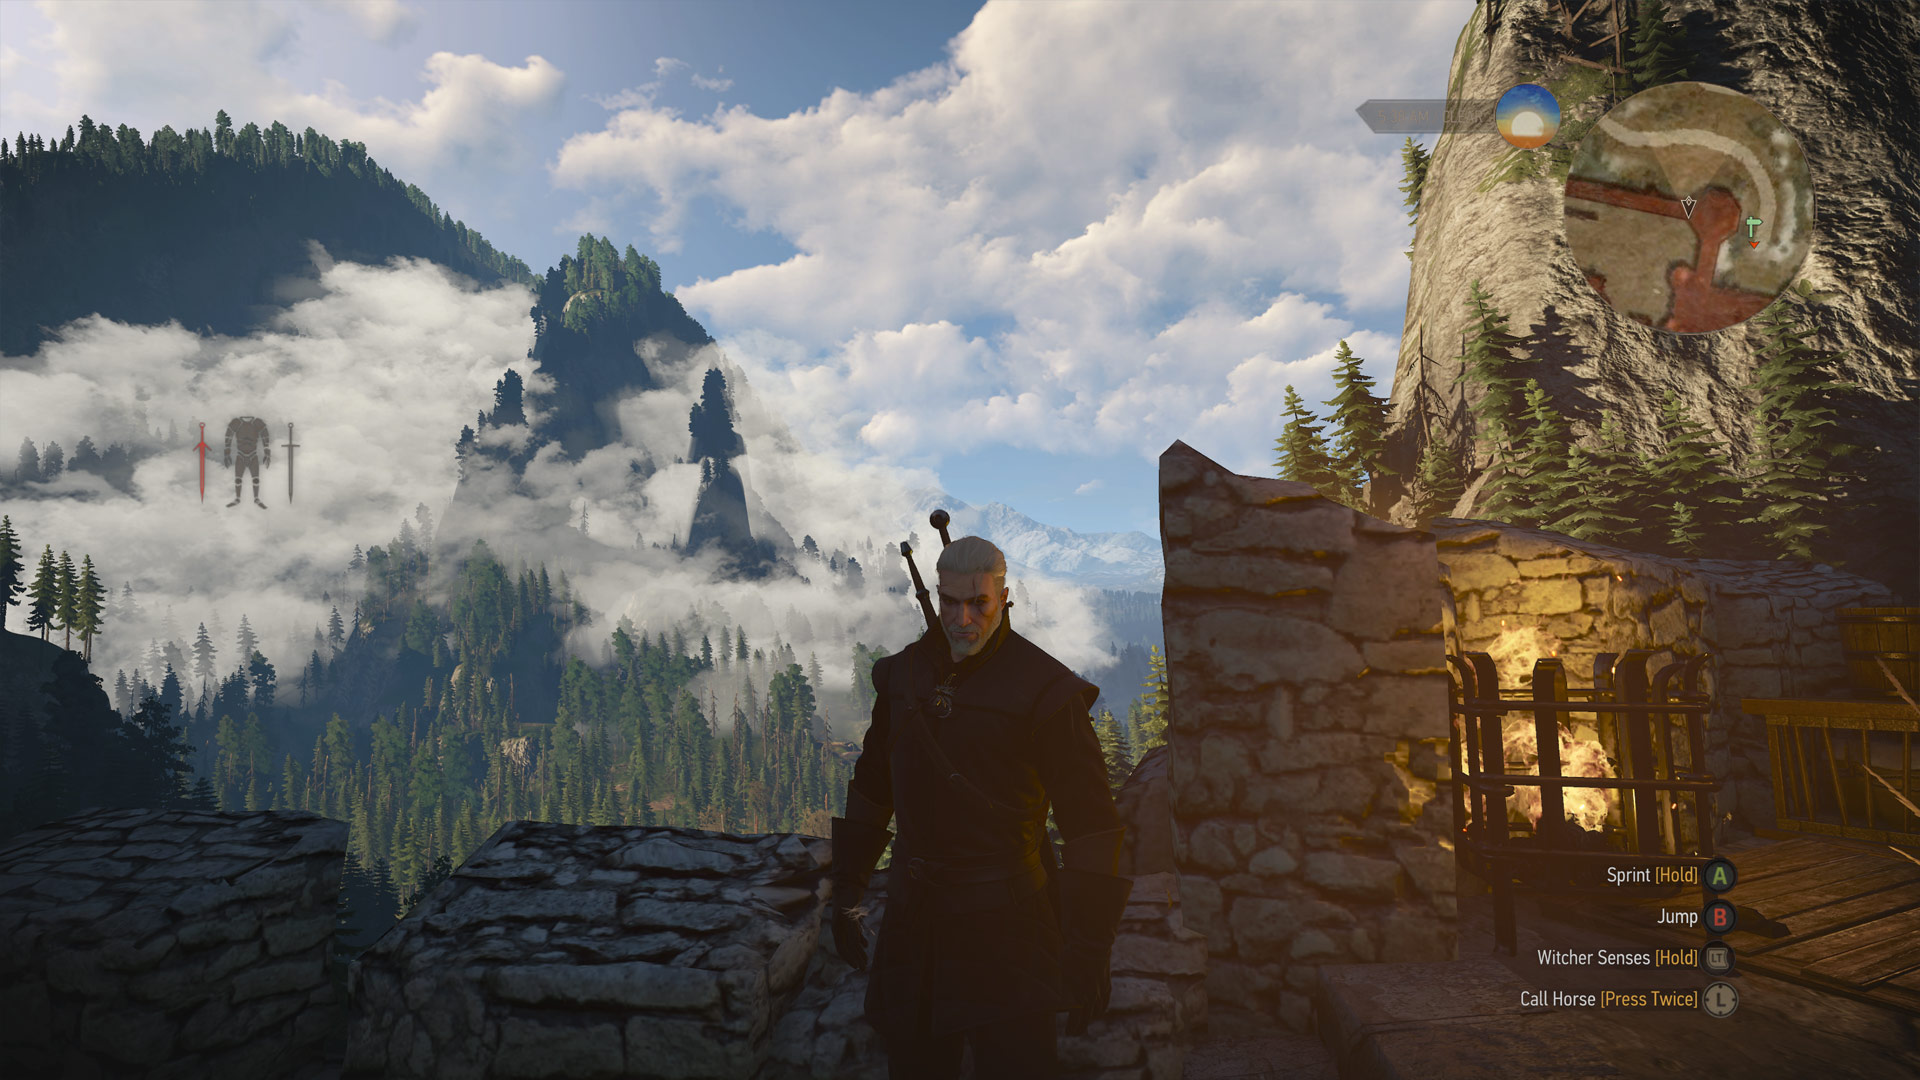 The Witcher 3: Wild Hunt supersampled